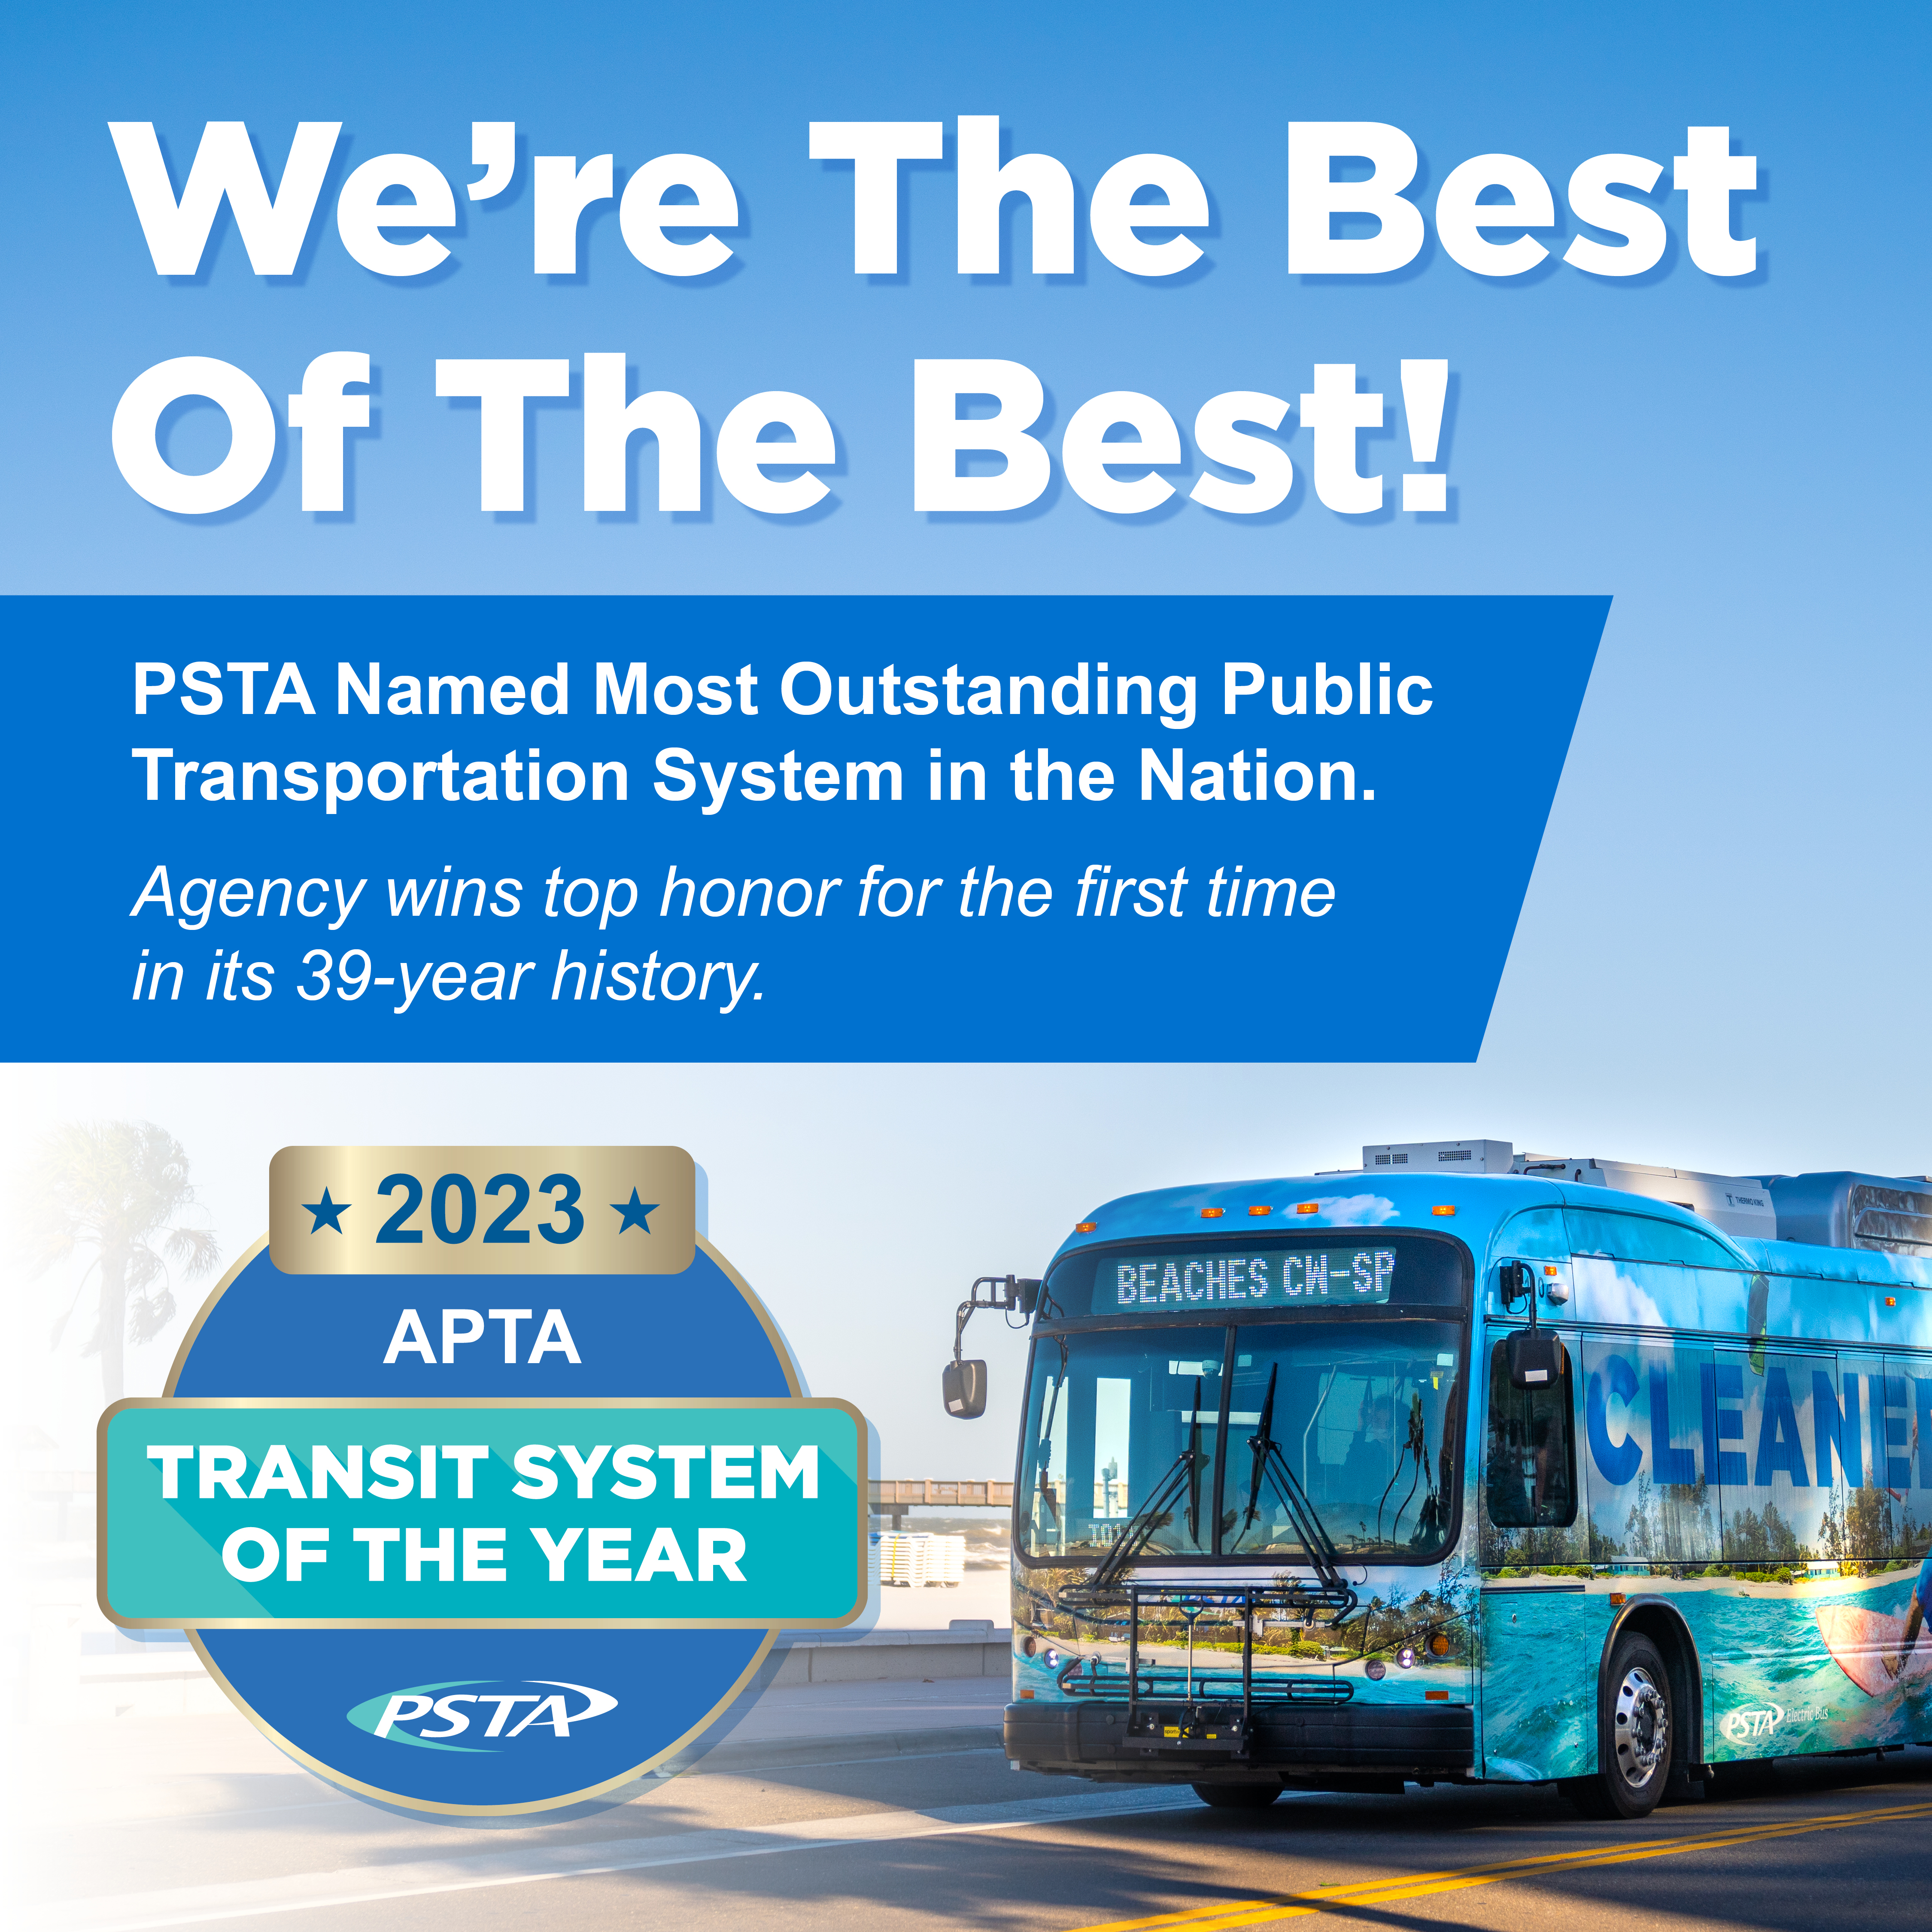 PSTA wins best transit system of the year for 2023